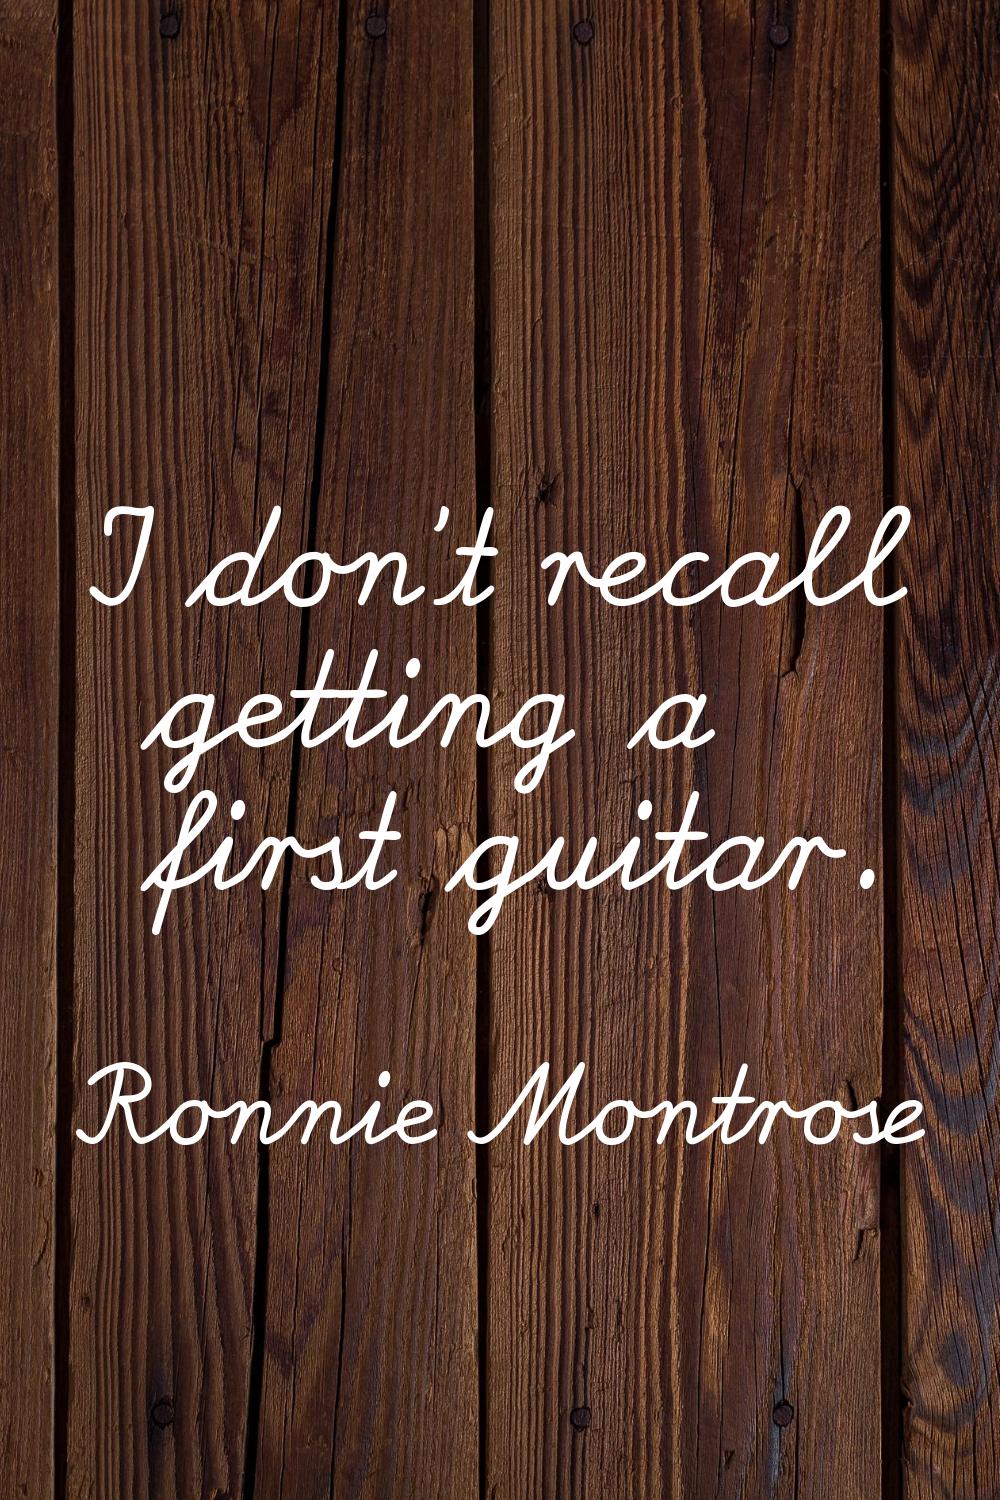 I don't recall getting a first guitar.